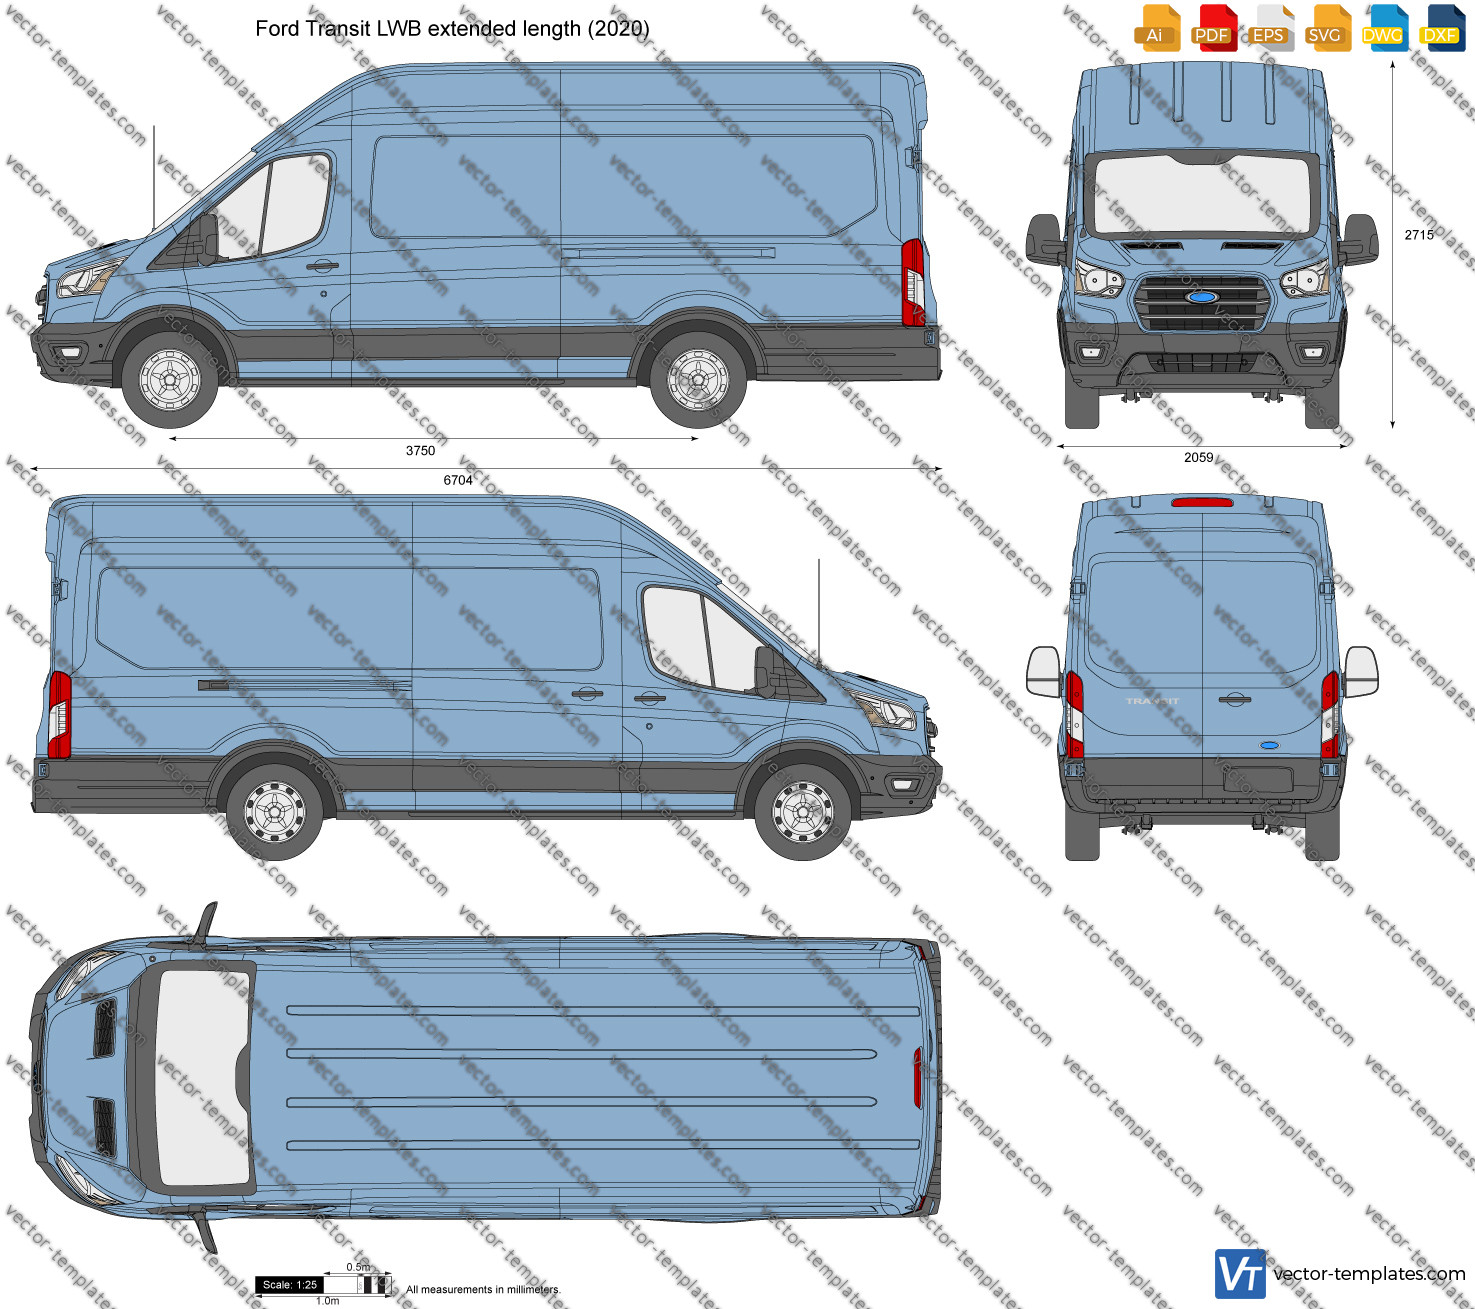 Templates - Cars - Ford - Ford Transit LWB extended length